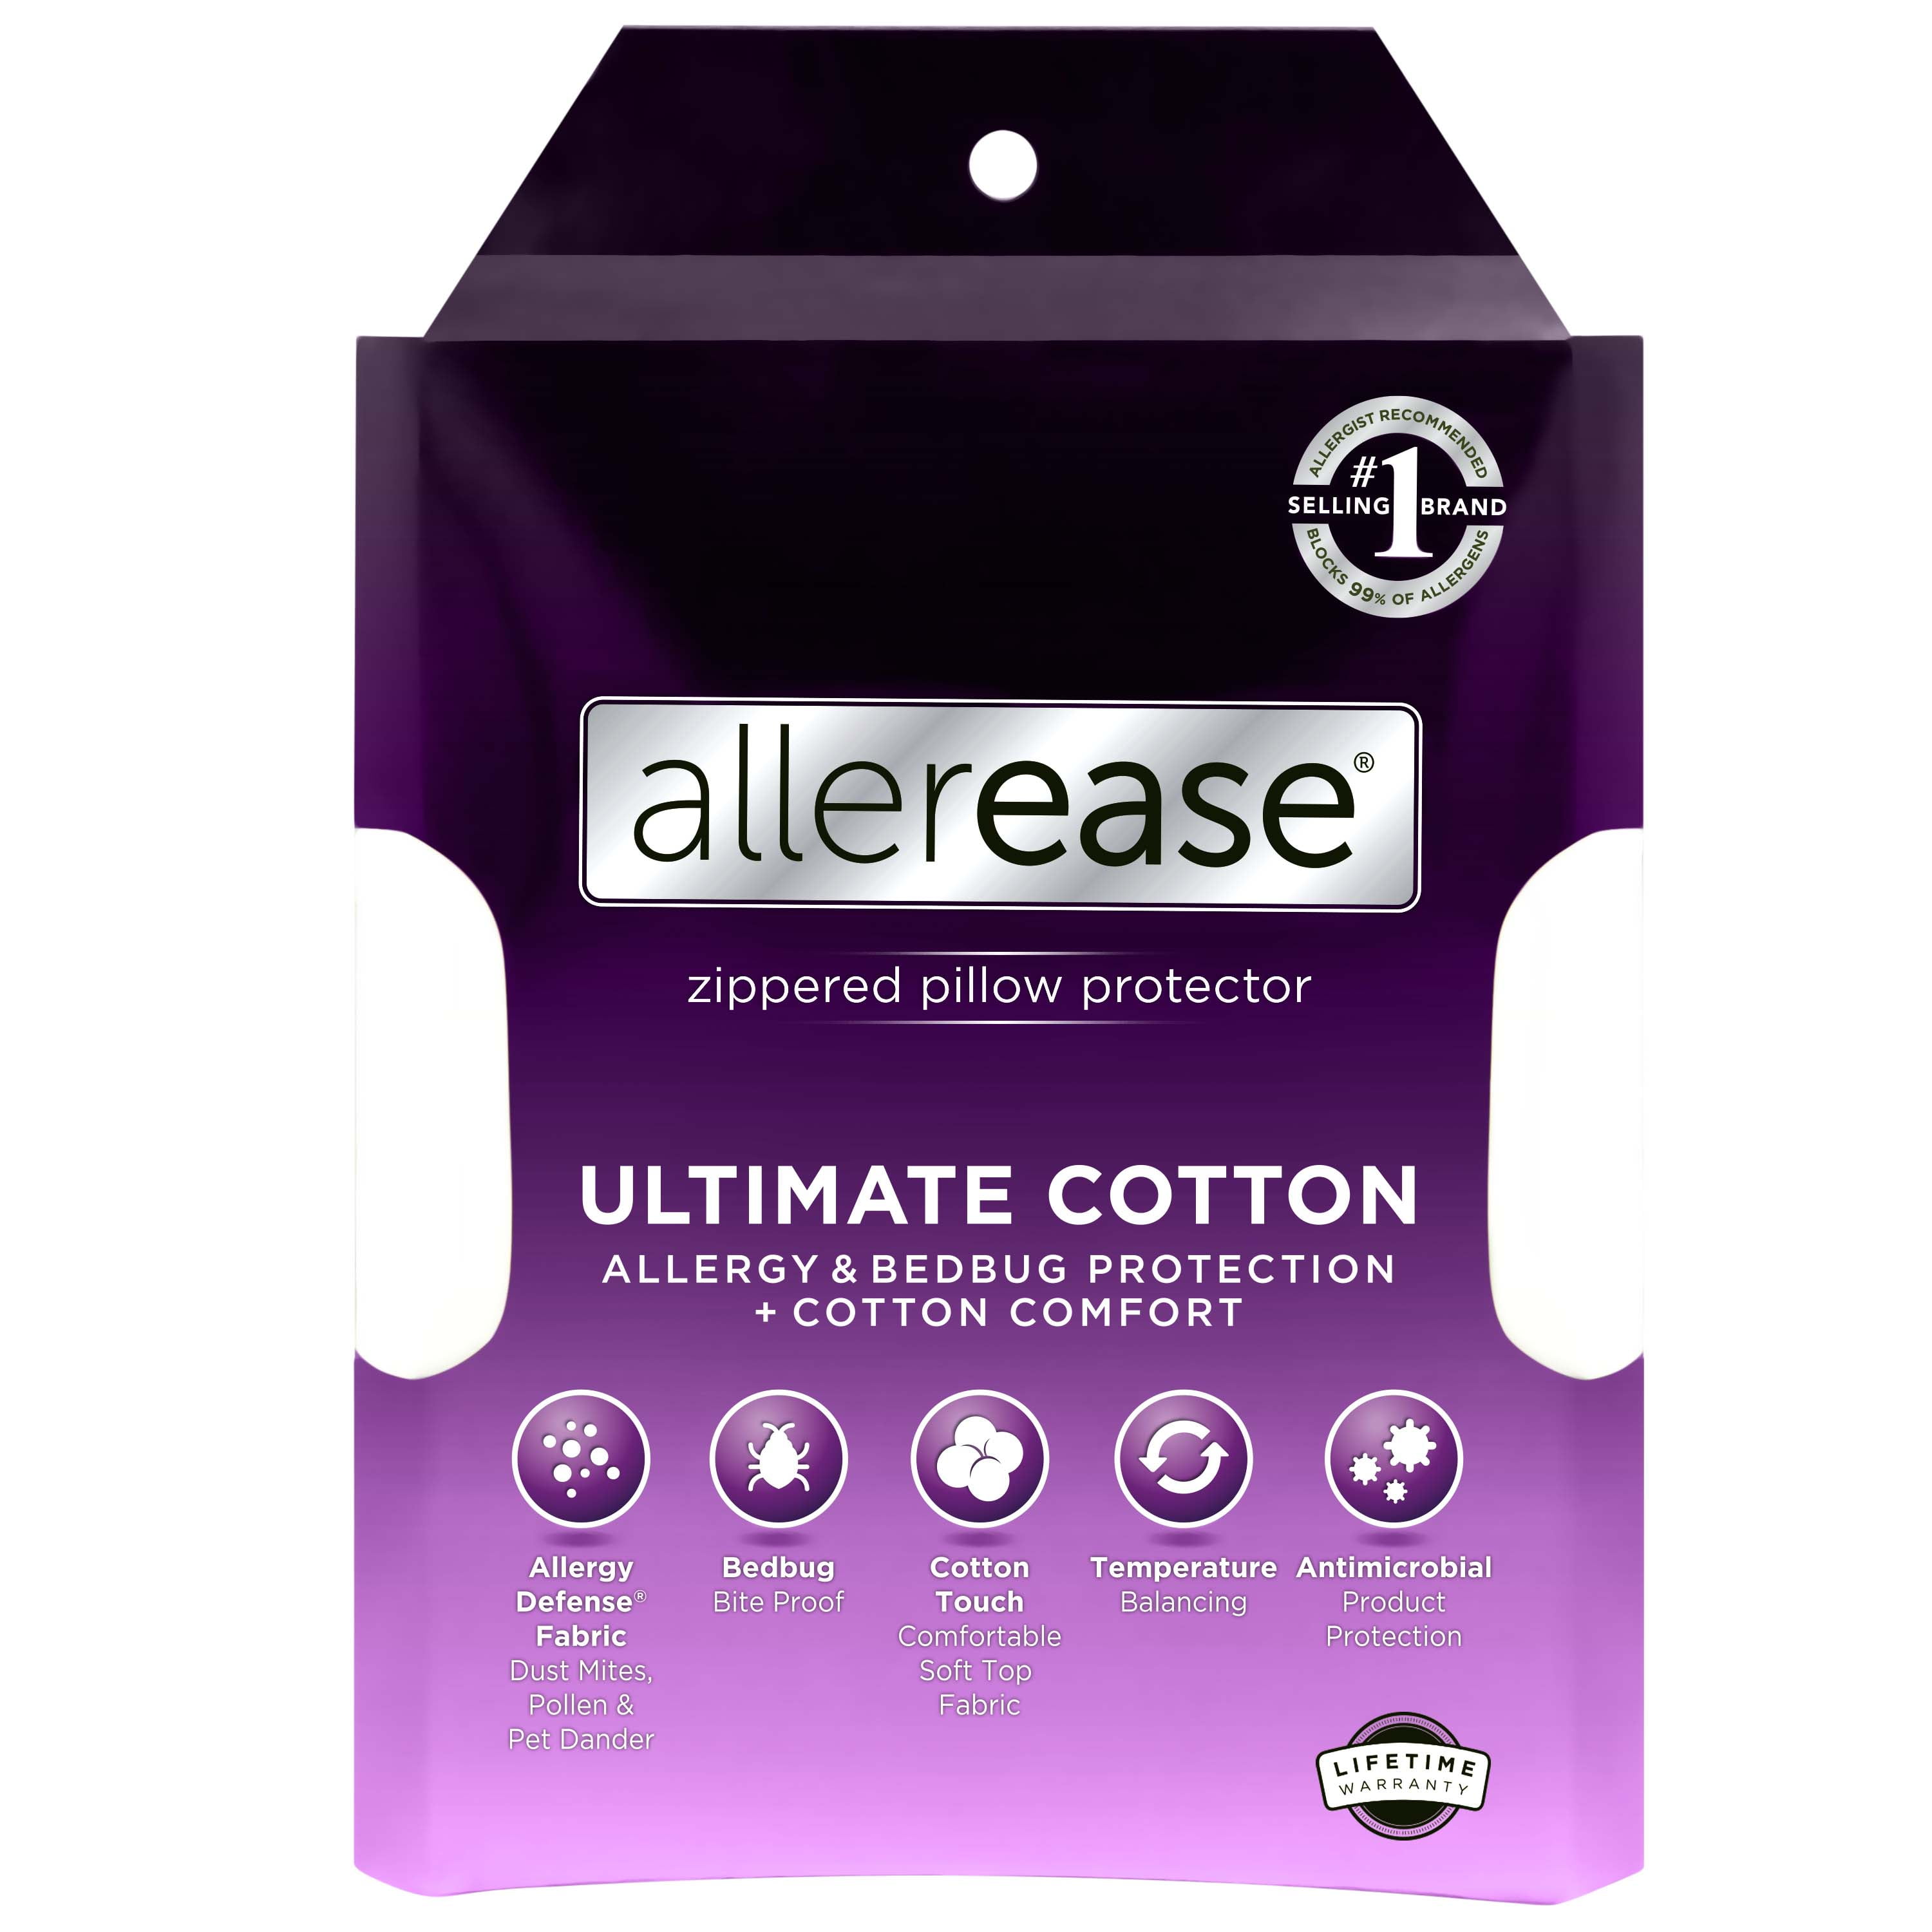 Allerease Ultimate Cotton Zippered Pillow Protector, Standard/Queen